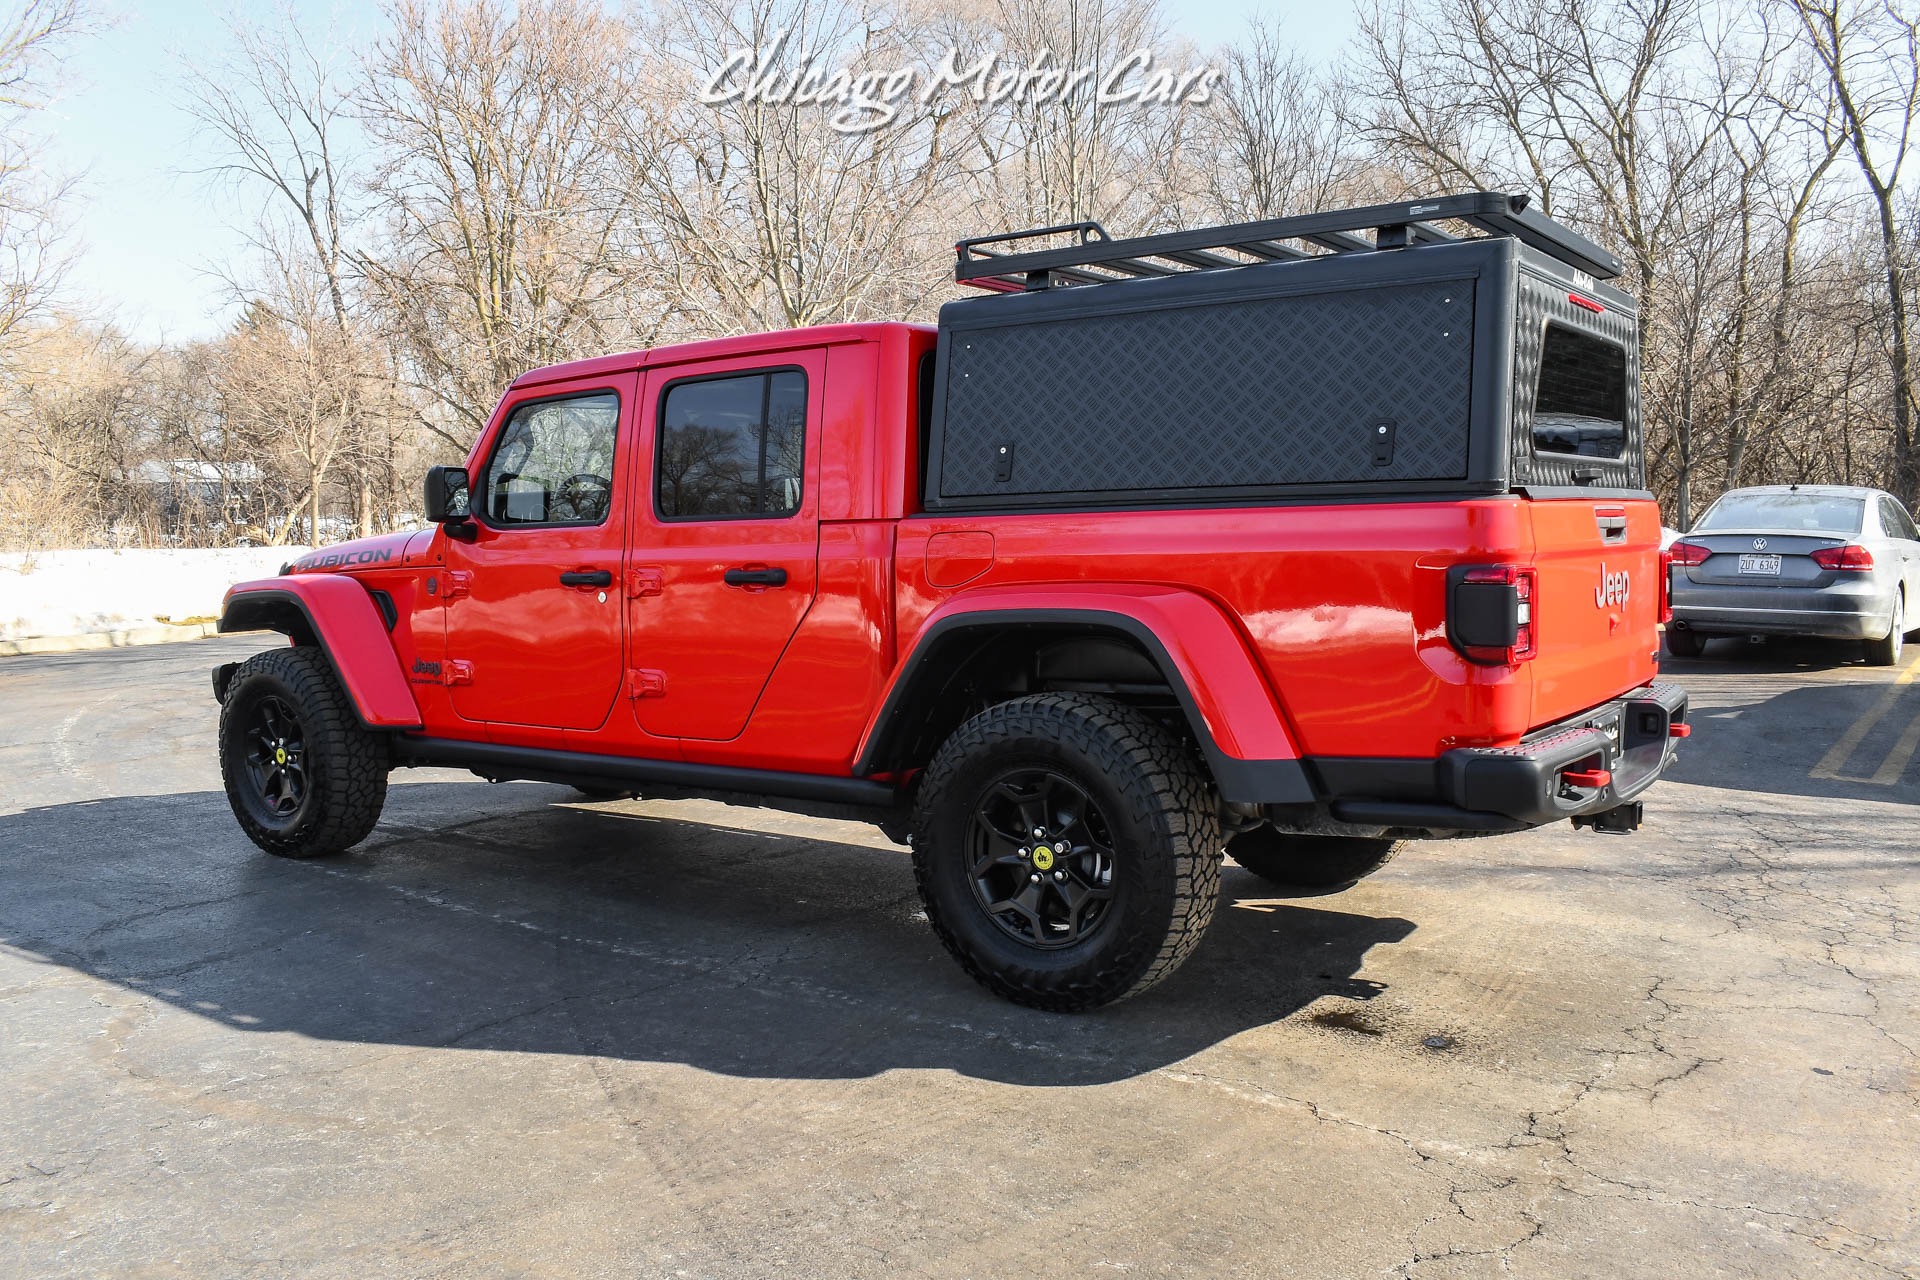 Used-2020-Jeep-Gladiator-Rubicon-Launch-Edition-62kMSRP-OVER-15k-in-Upgrades-Overlanding-Setup